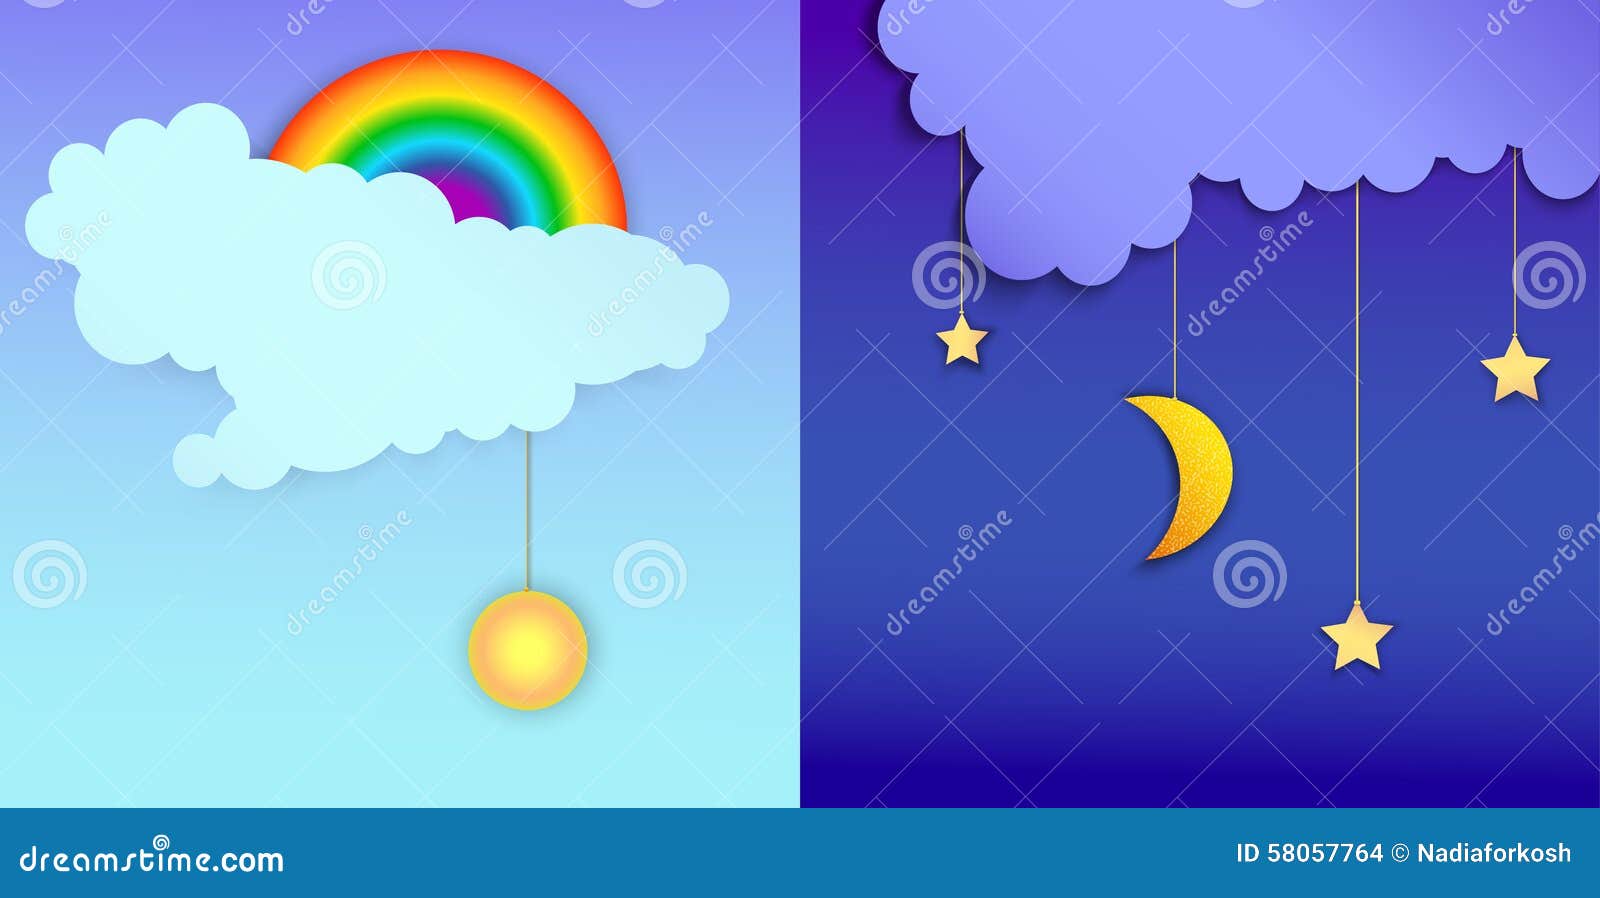 Day and Night picture for Kids